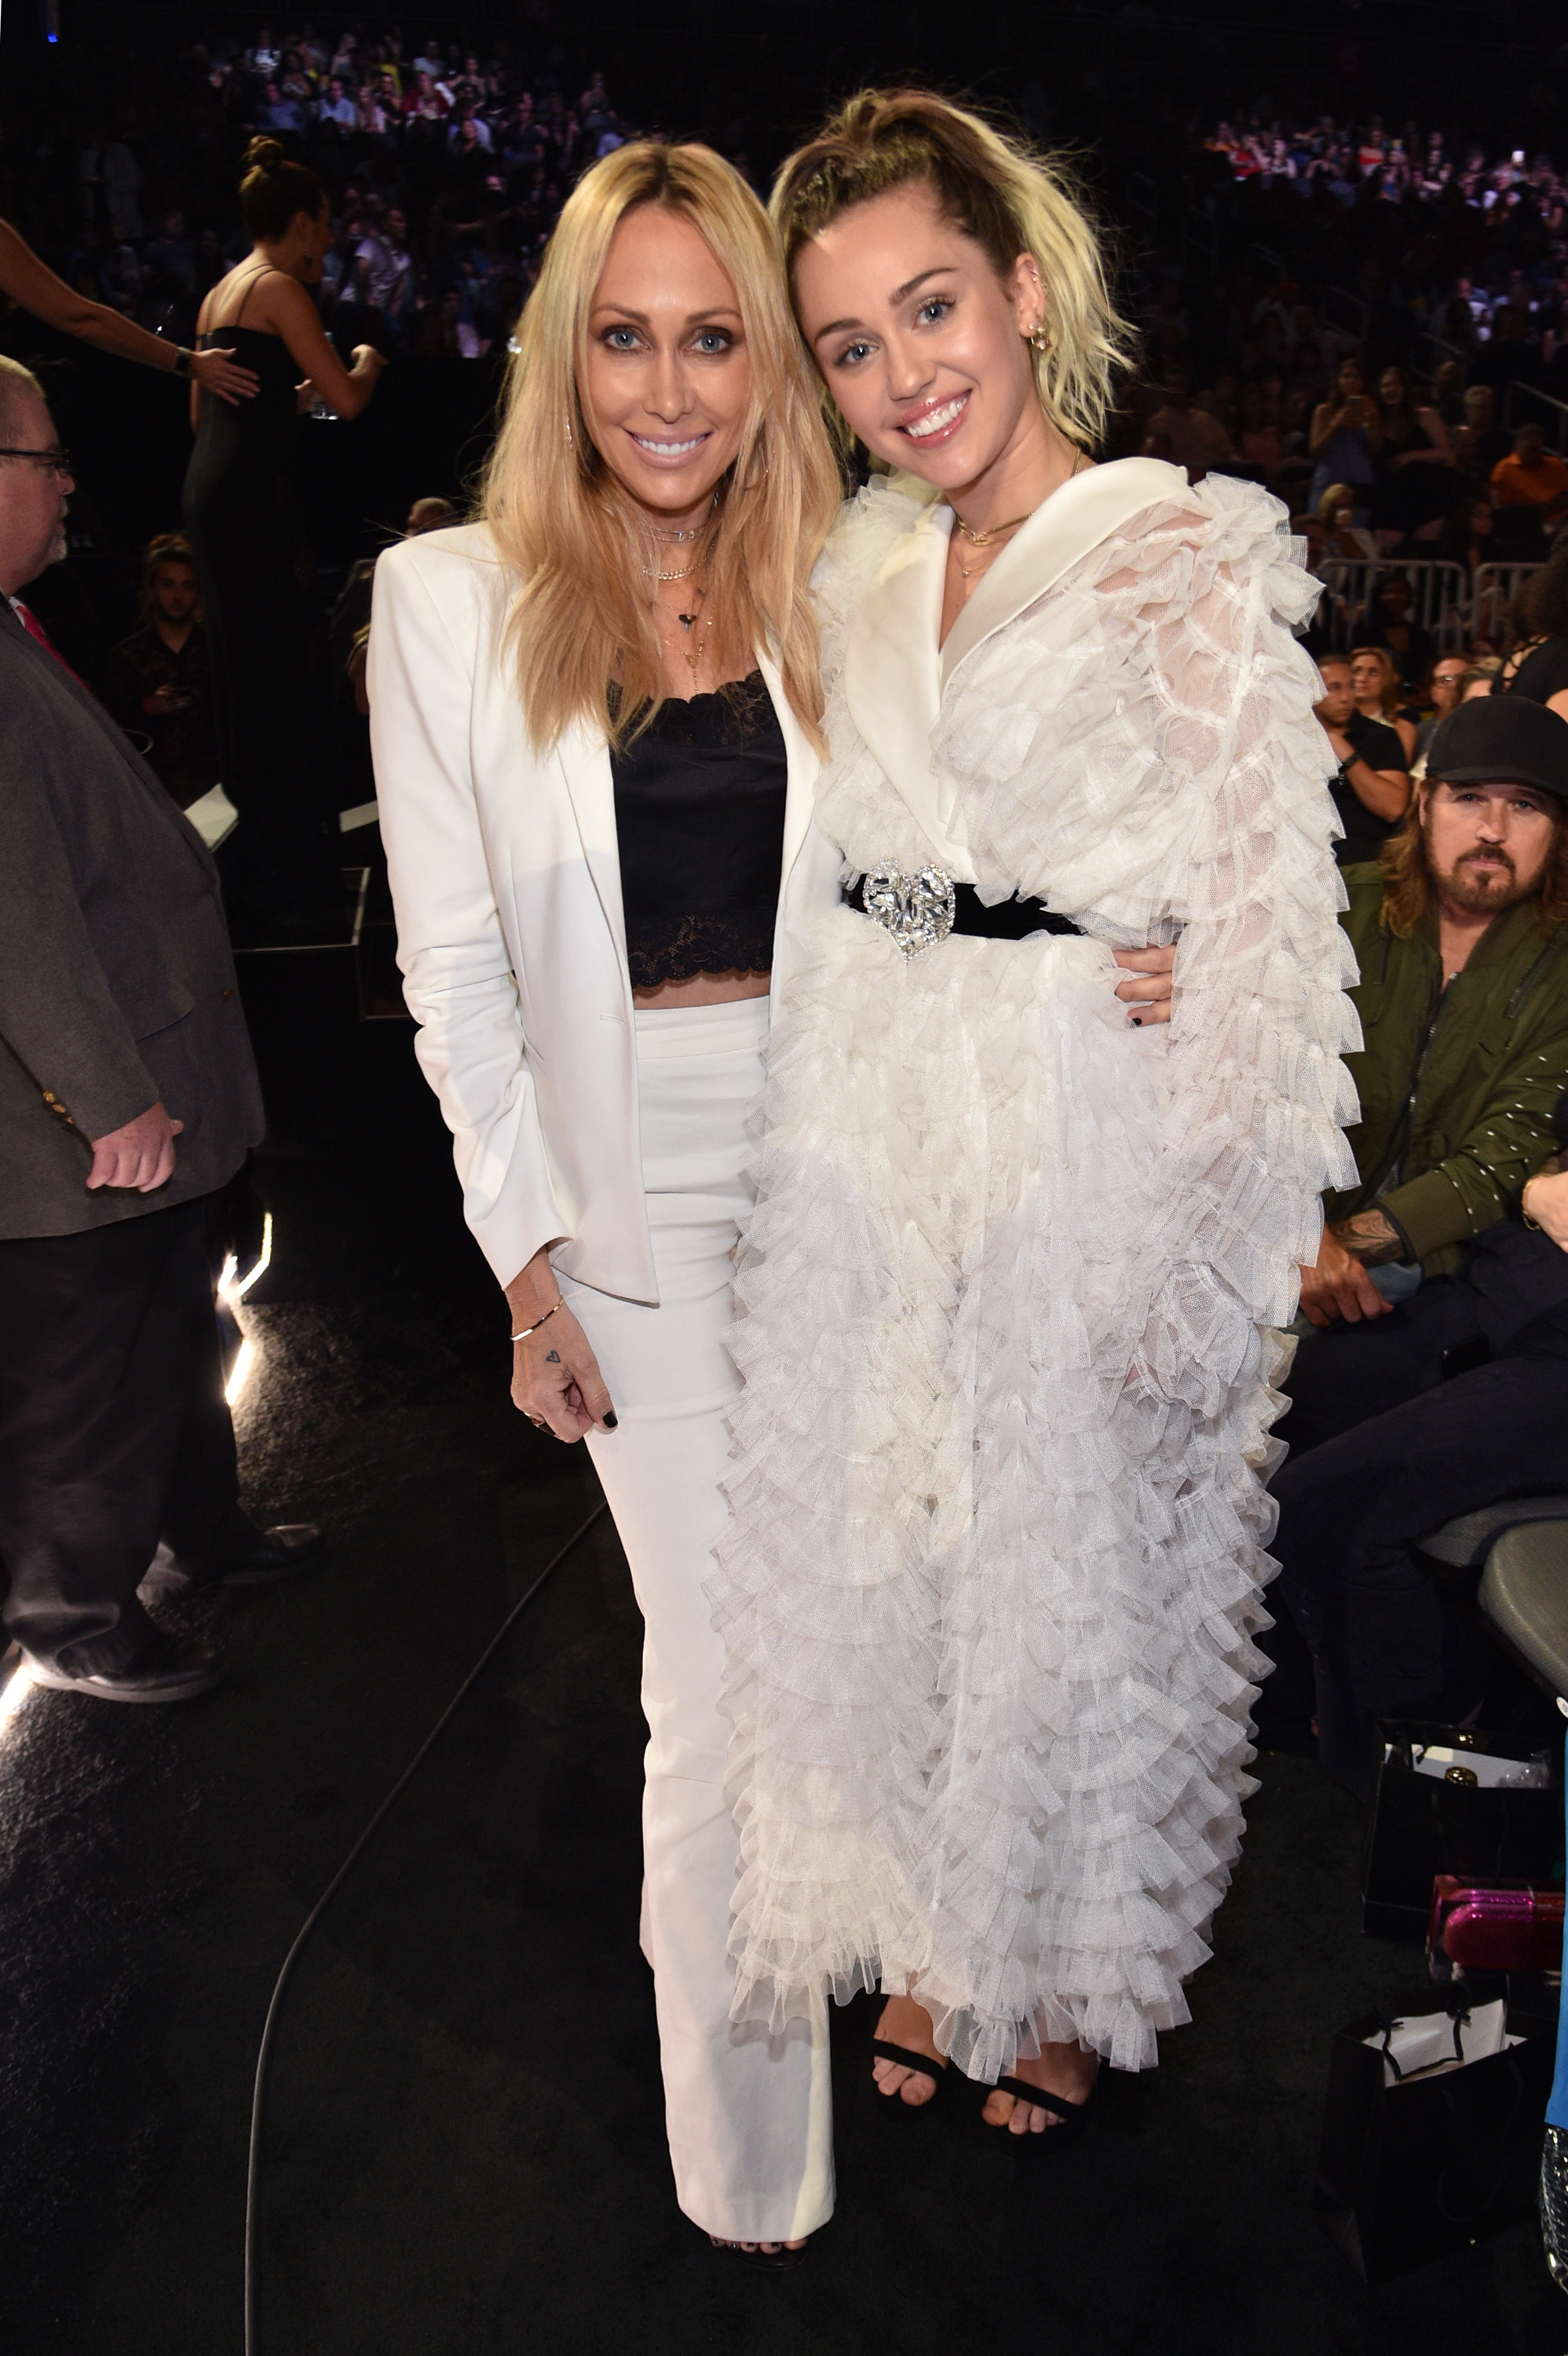 Tish Cyrus and Miley Cyrus attend the Billboard Music Awards in Las Vegas, Nevada, on May 21, 2017. | Source: Getty Images